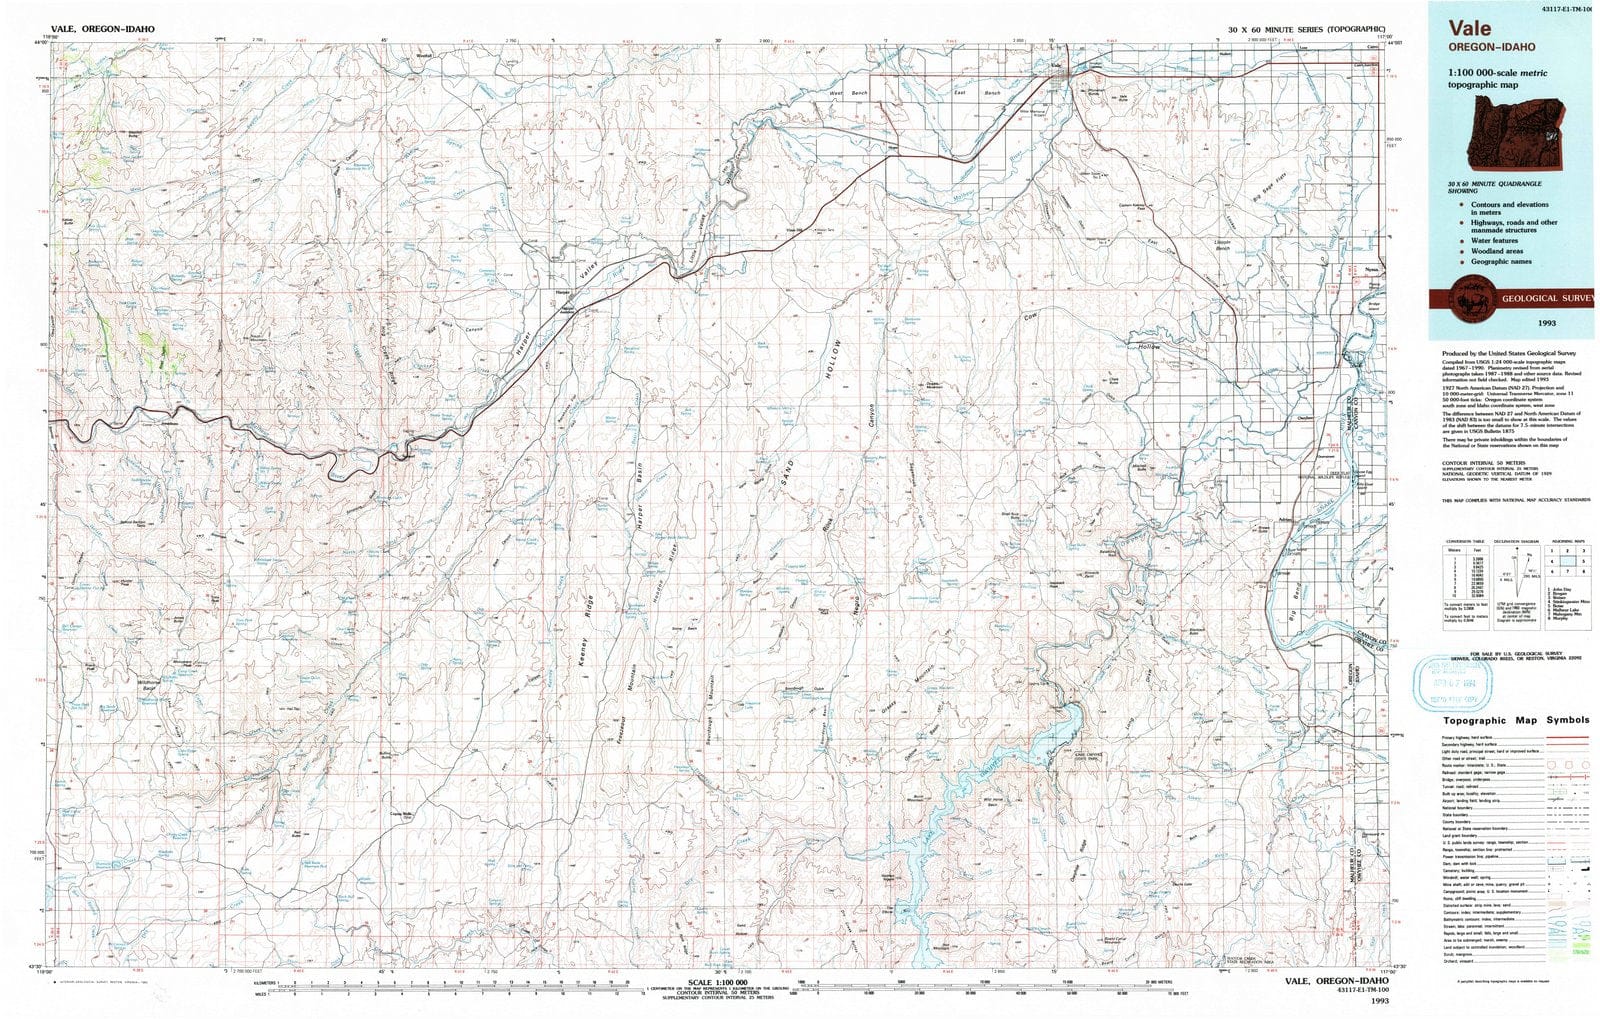 1993 Vale, OR - Oregon - USGS Topographic Map